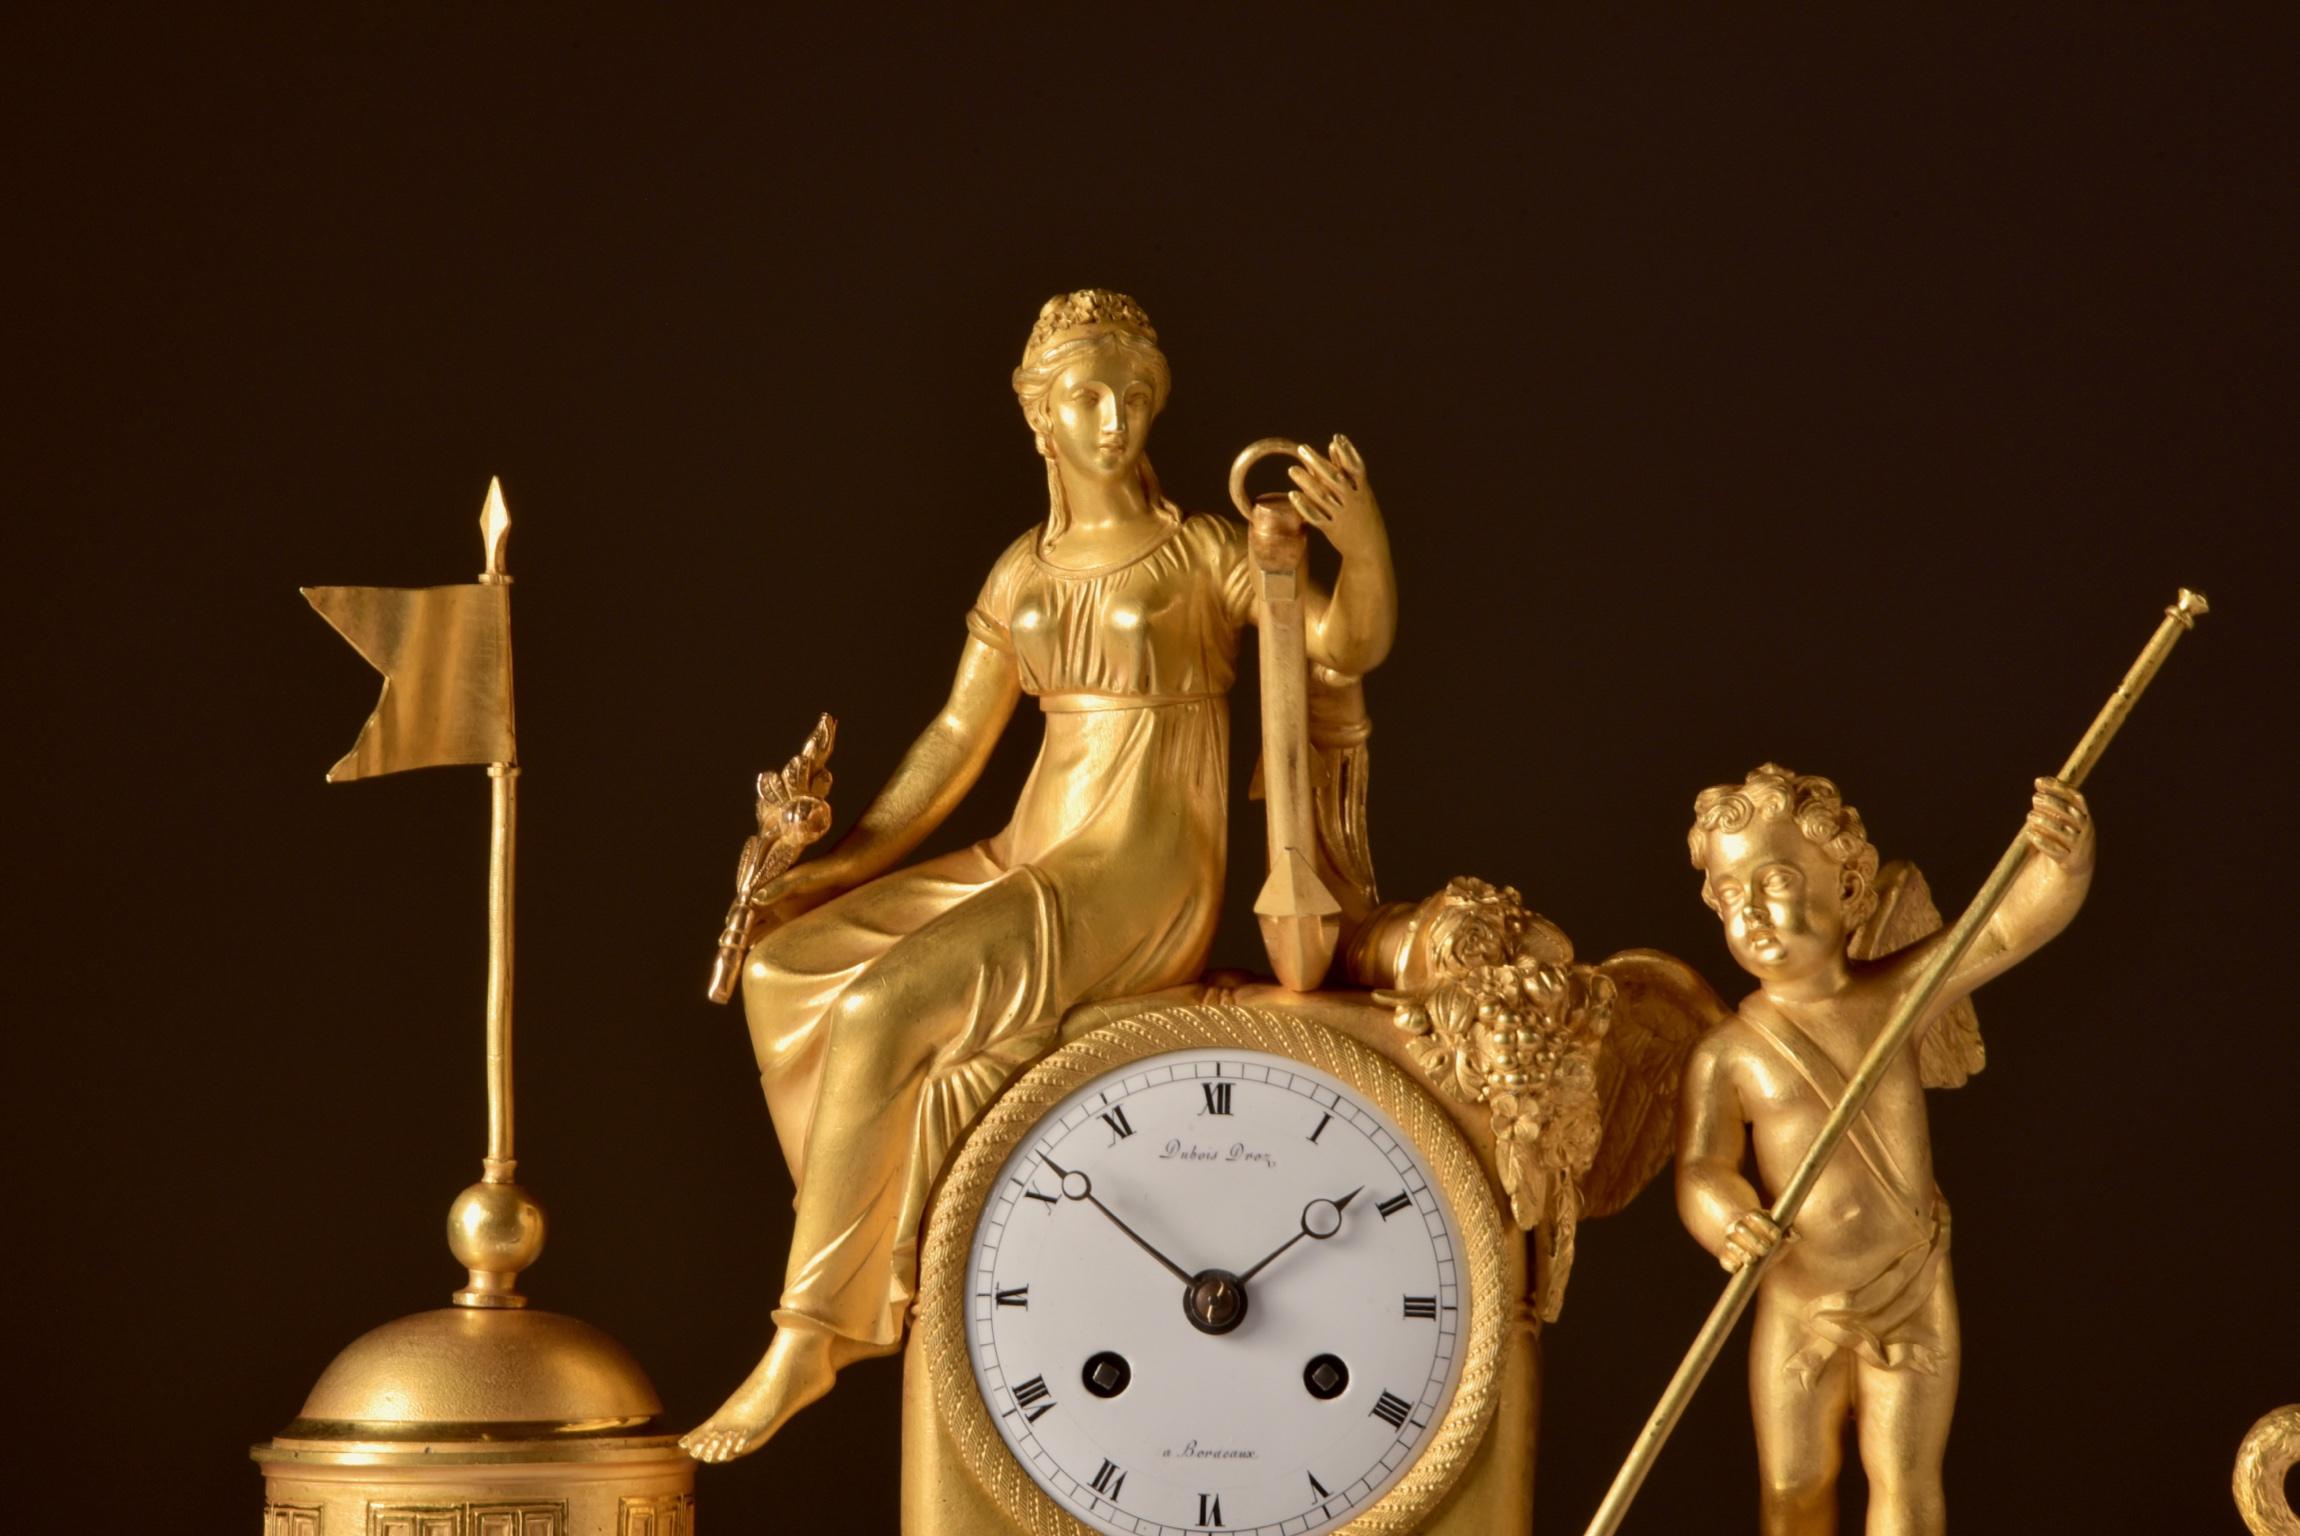 Rare mythological clock in gilt bronze. Beautiful scene of a decorated boat beneath the mask of Poseidon, God of the sea, with a gooseneck, the goddess Venus and a standing cherub. The boat rests on two fish.
Power Reserve: 8 day